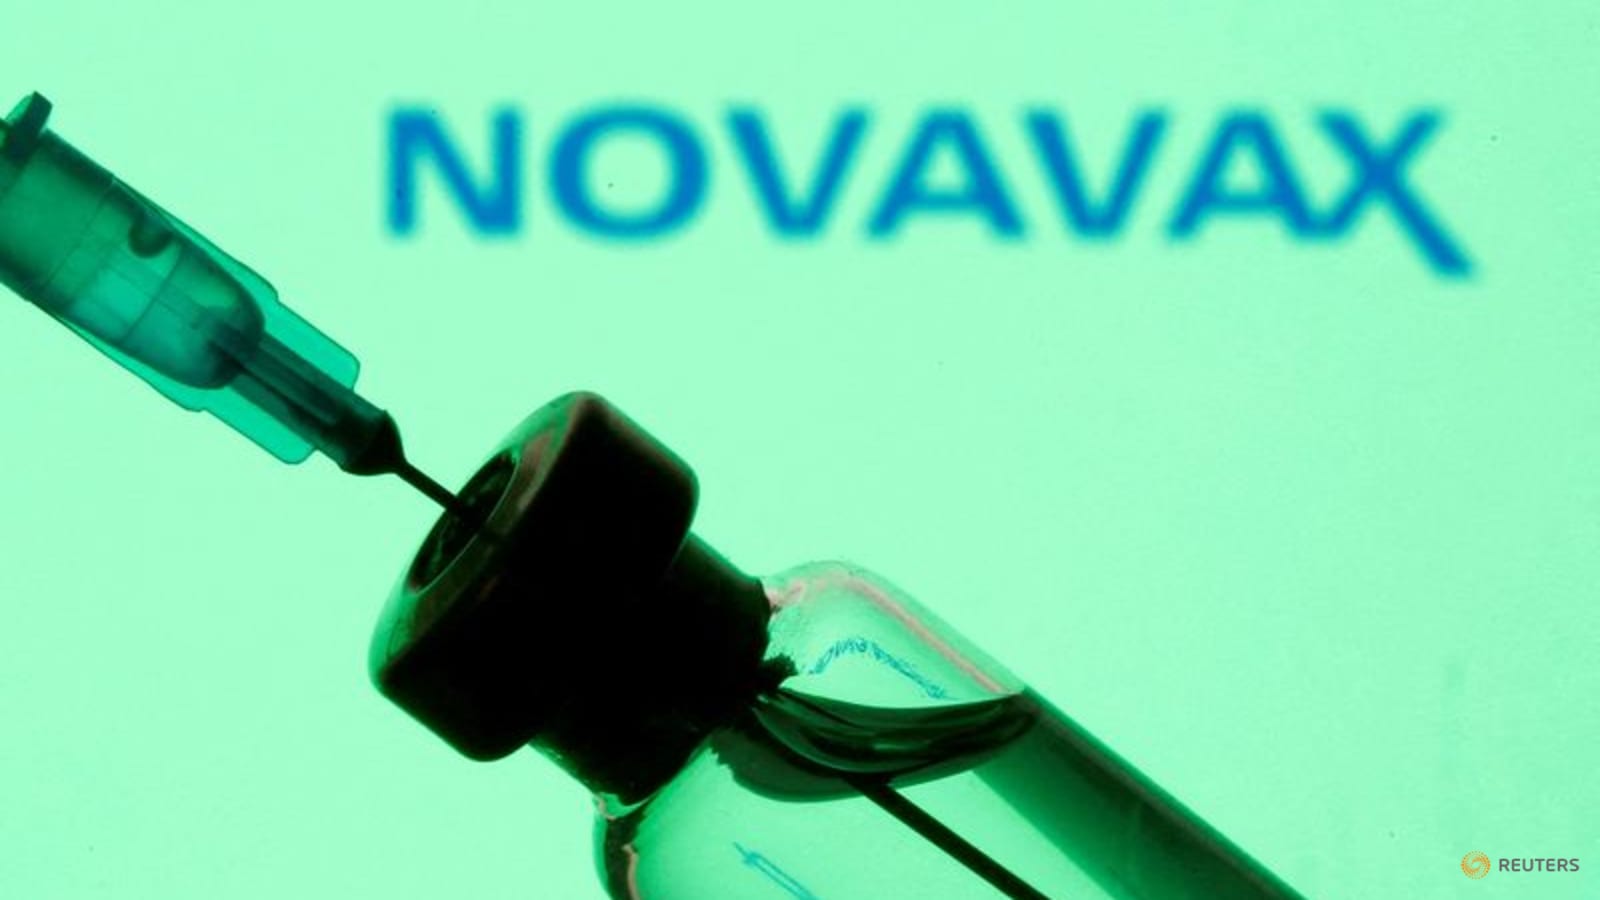 novavax-2022-covid-19-vaccine-deliveries-off-to-slow-start,-shares-drop